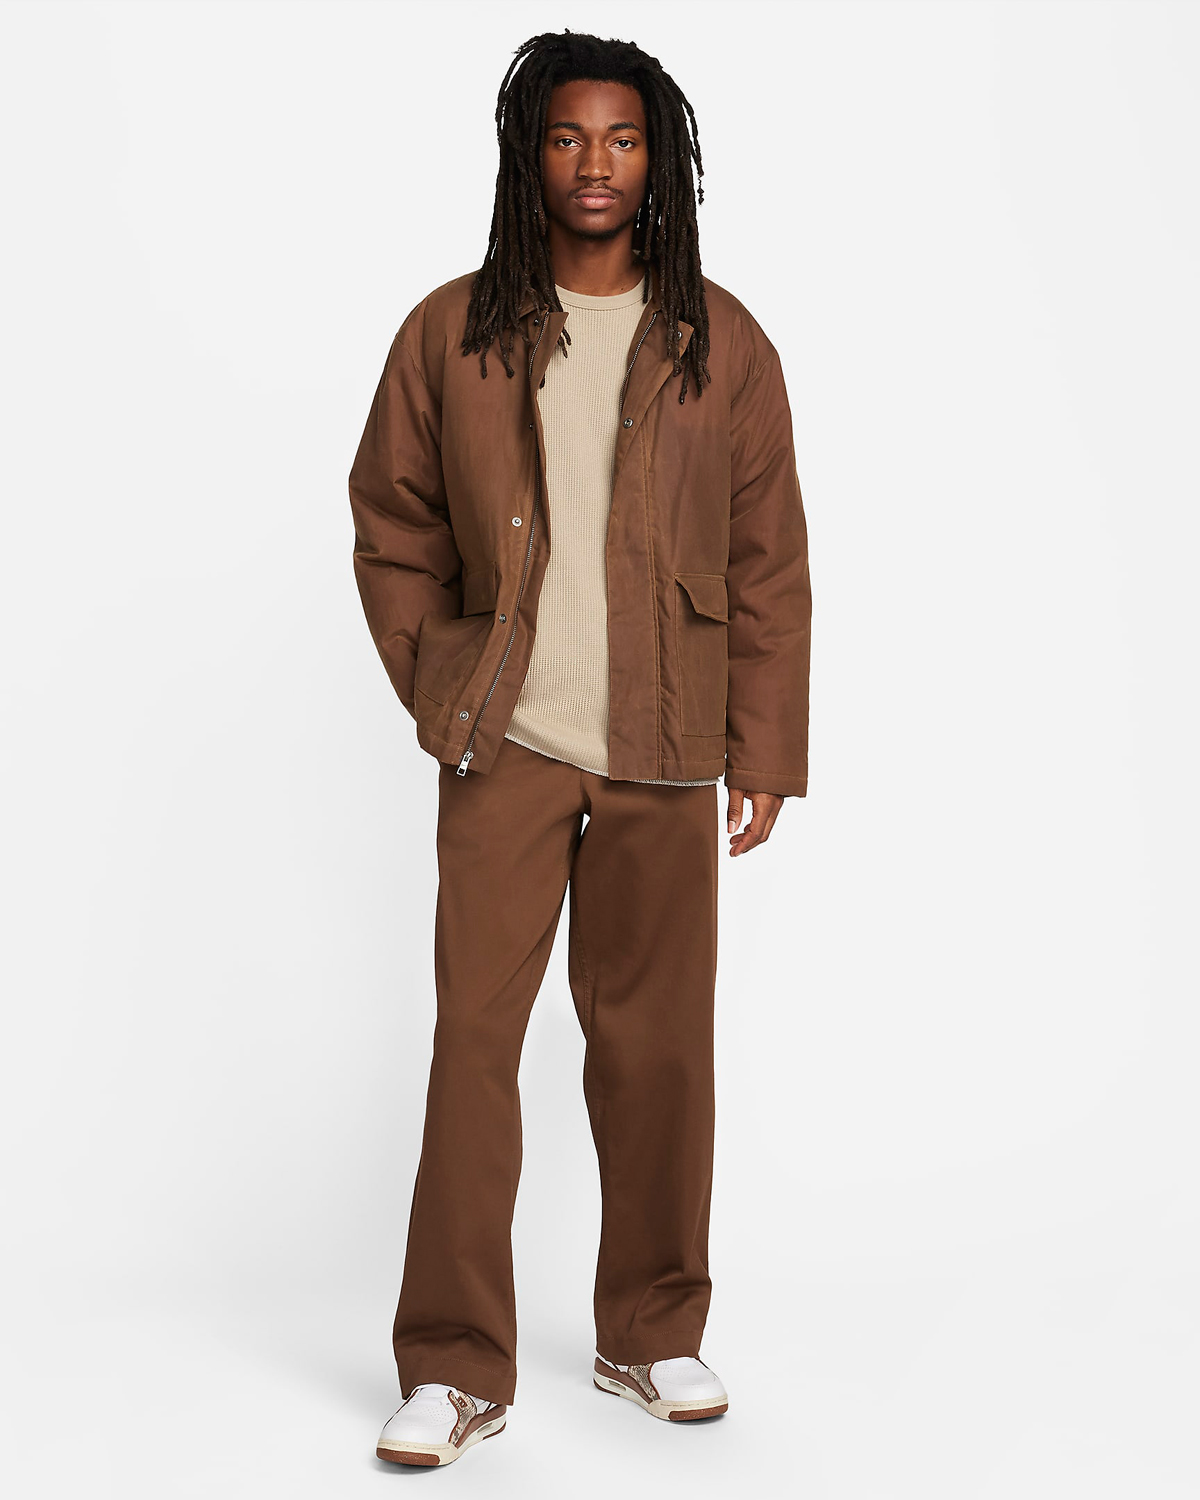 Nike-Life-Waxed-Canvas-Work-Jacket-Light-British-Tan-Outfit